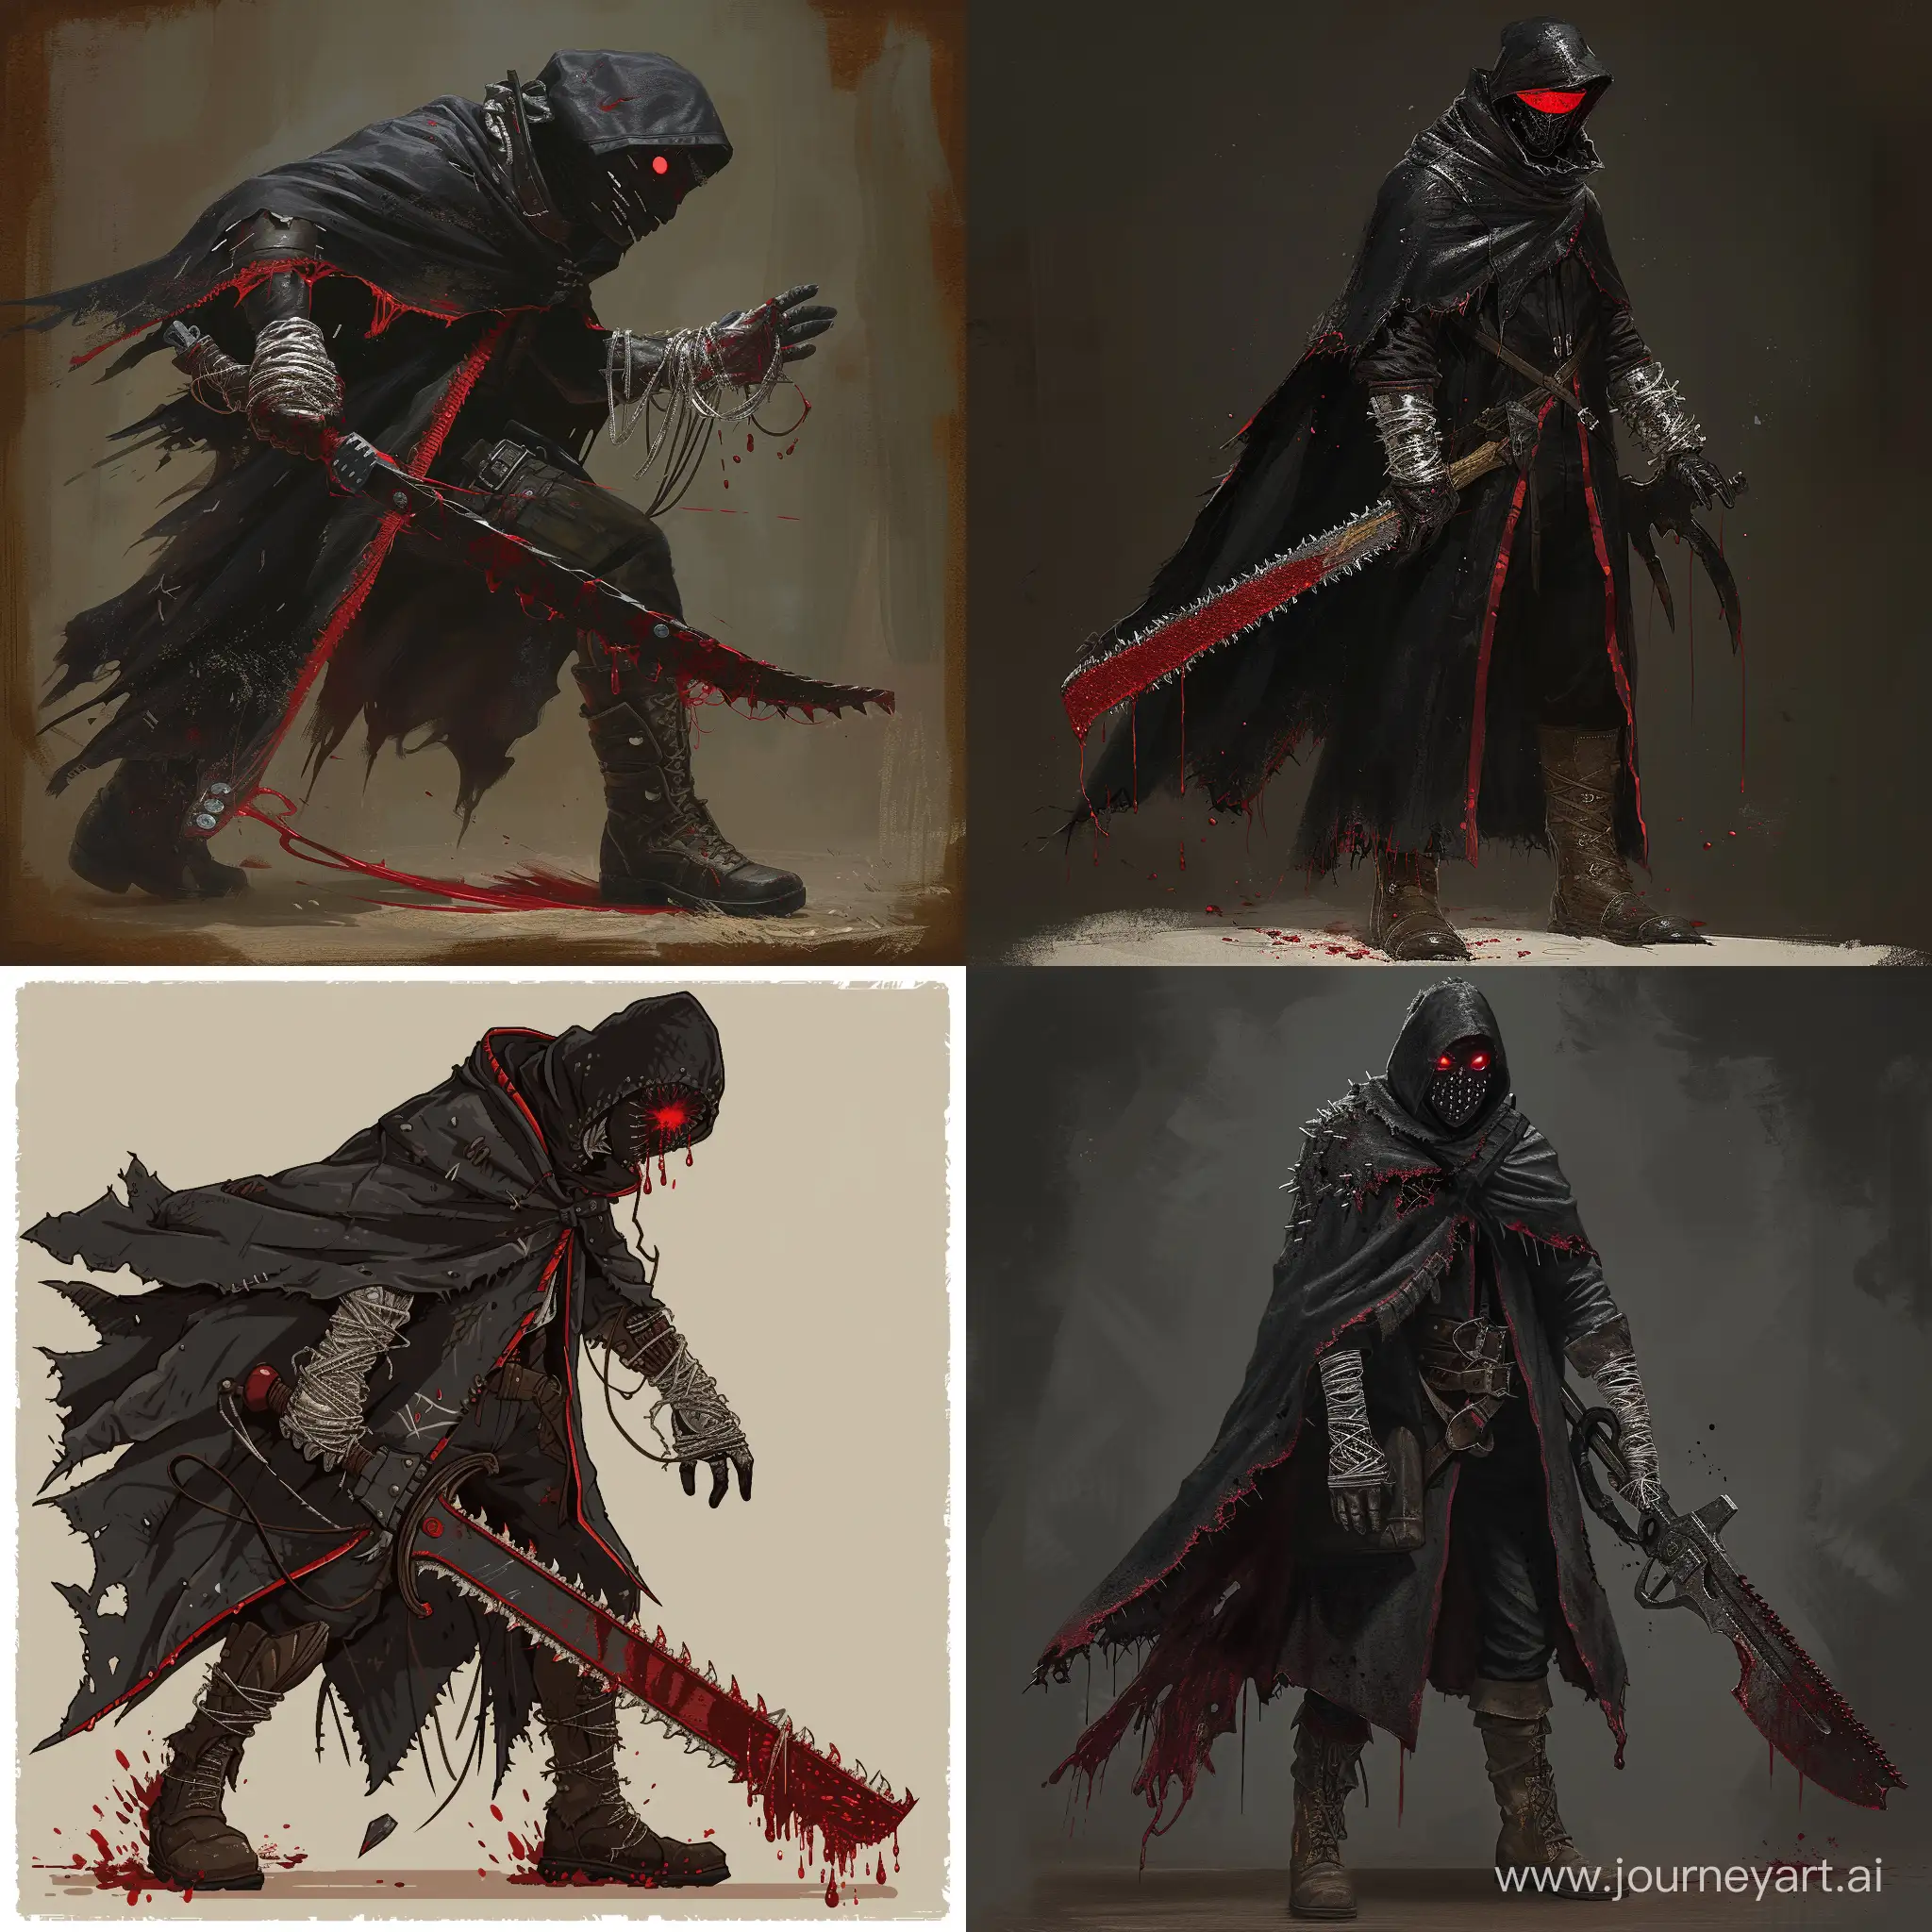 A man wearing Tattered black cloak with red trim Silver threaded gloves and boots Leather mask with eerie red lenses wielding a Weapon, Saw Cleaver transformed into a vicious serrated blade, 1990's pixel art, 1970's dark fantasy style, bloodborne style, gritty, dark, blood on weapons, edgy